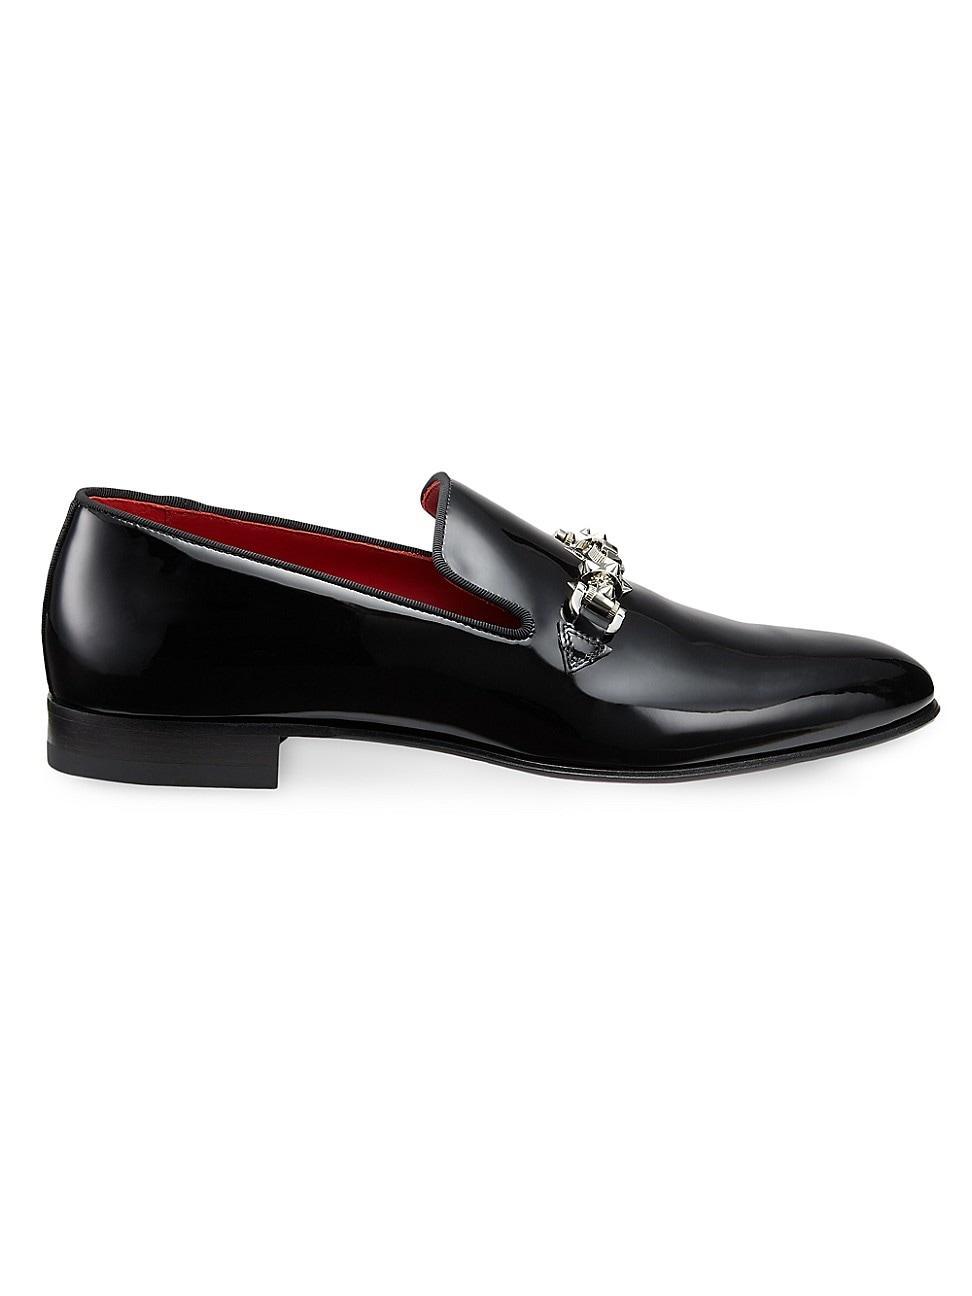 Christian Louboutin Equiswing Patent Bit Loafer Product Image